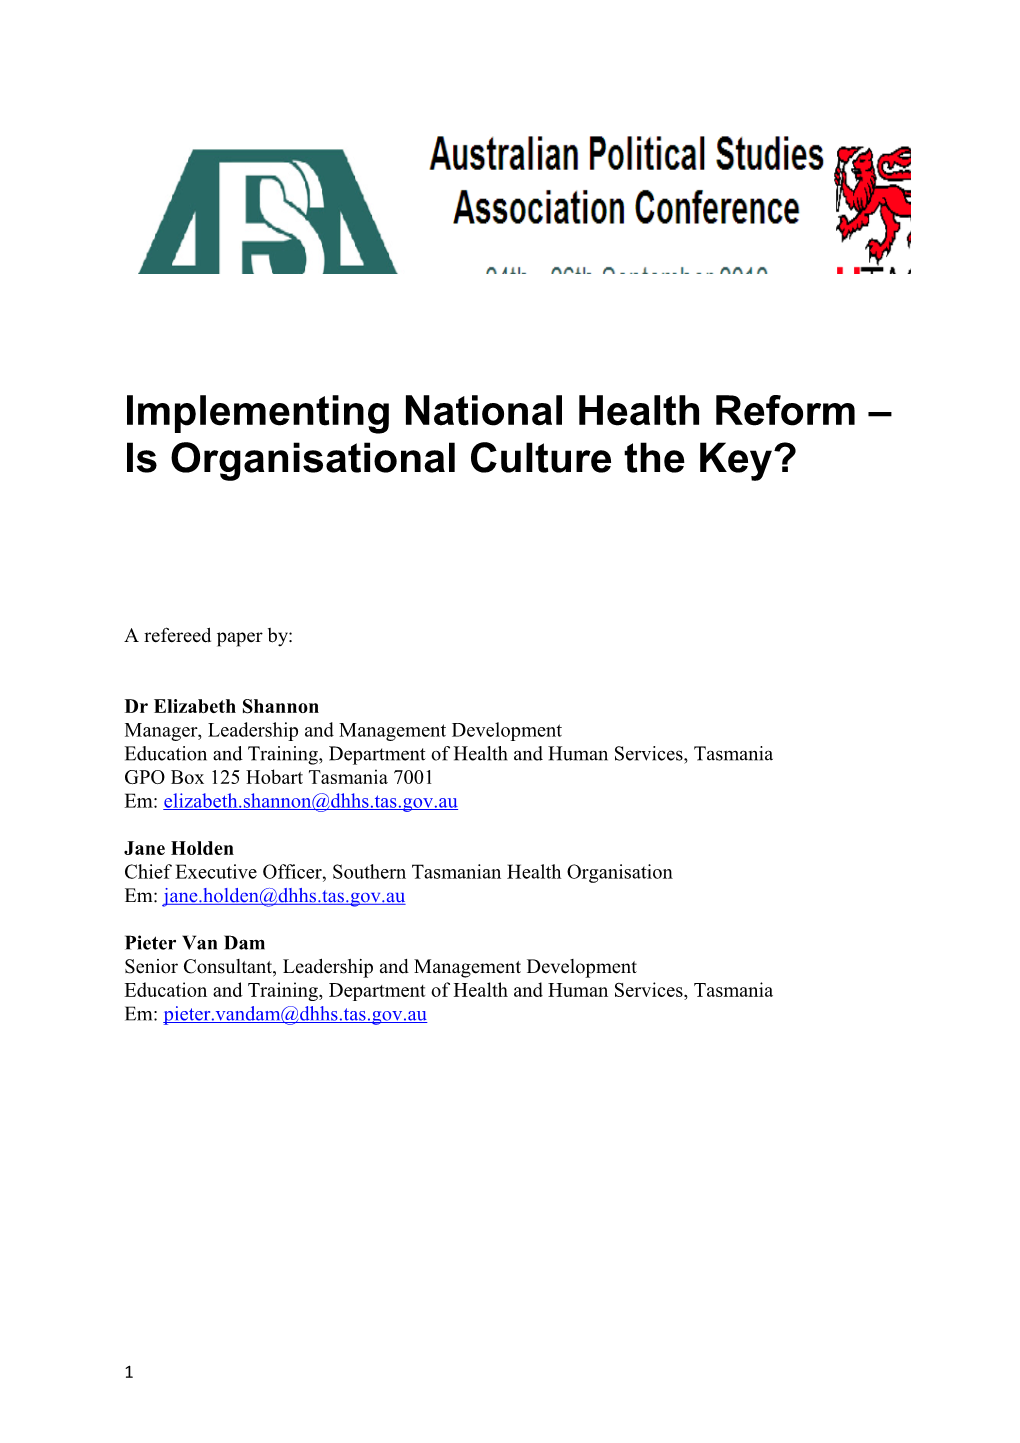 Implementing National Health Reform Is Organisational Culture the Key?